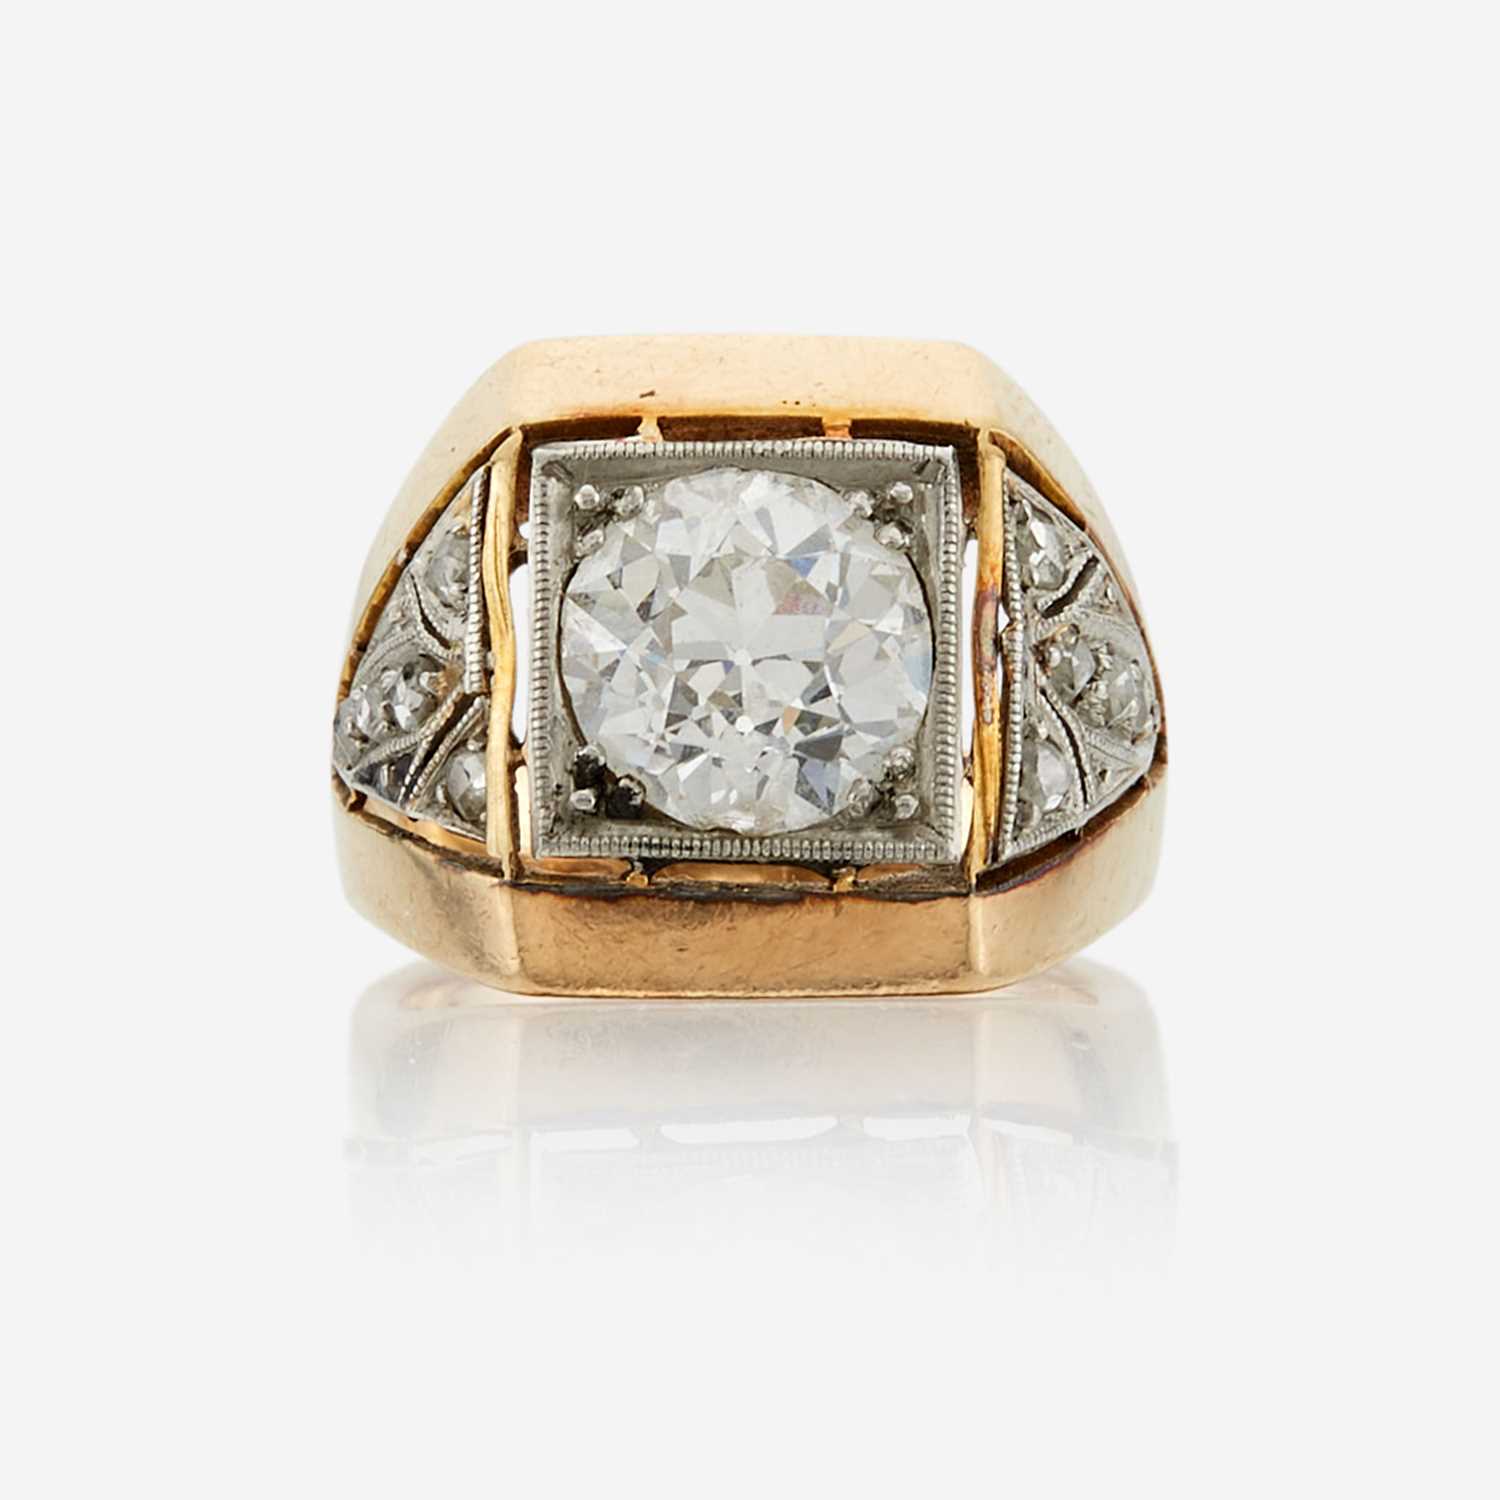 Lot 59 - A diamond, gold, and platinum ring